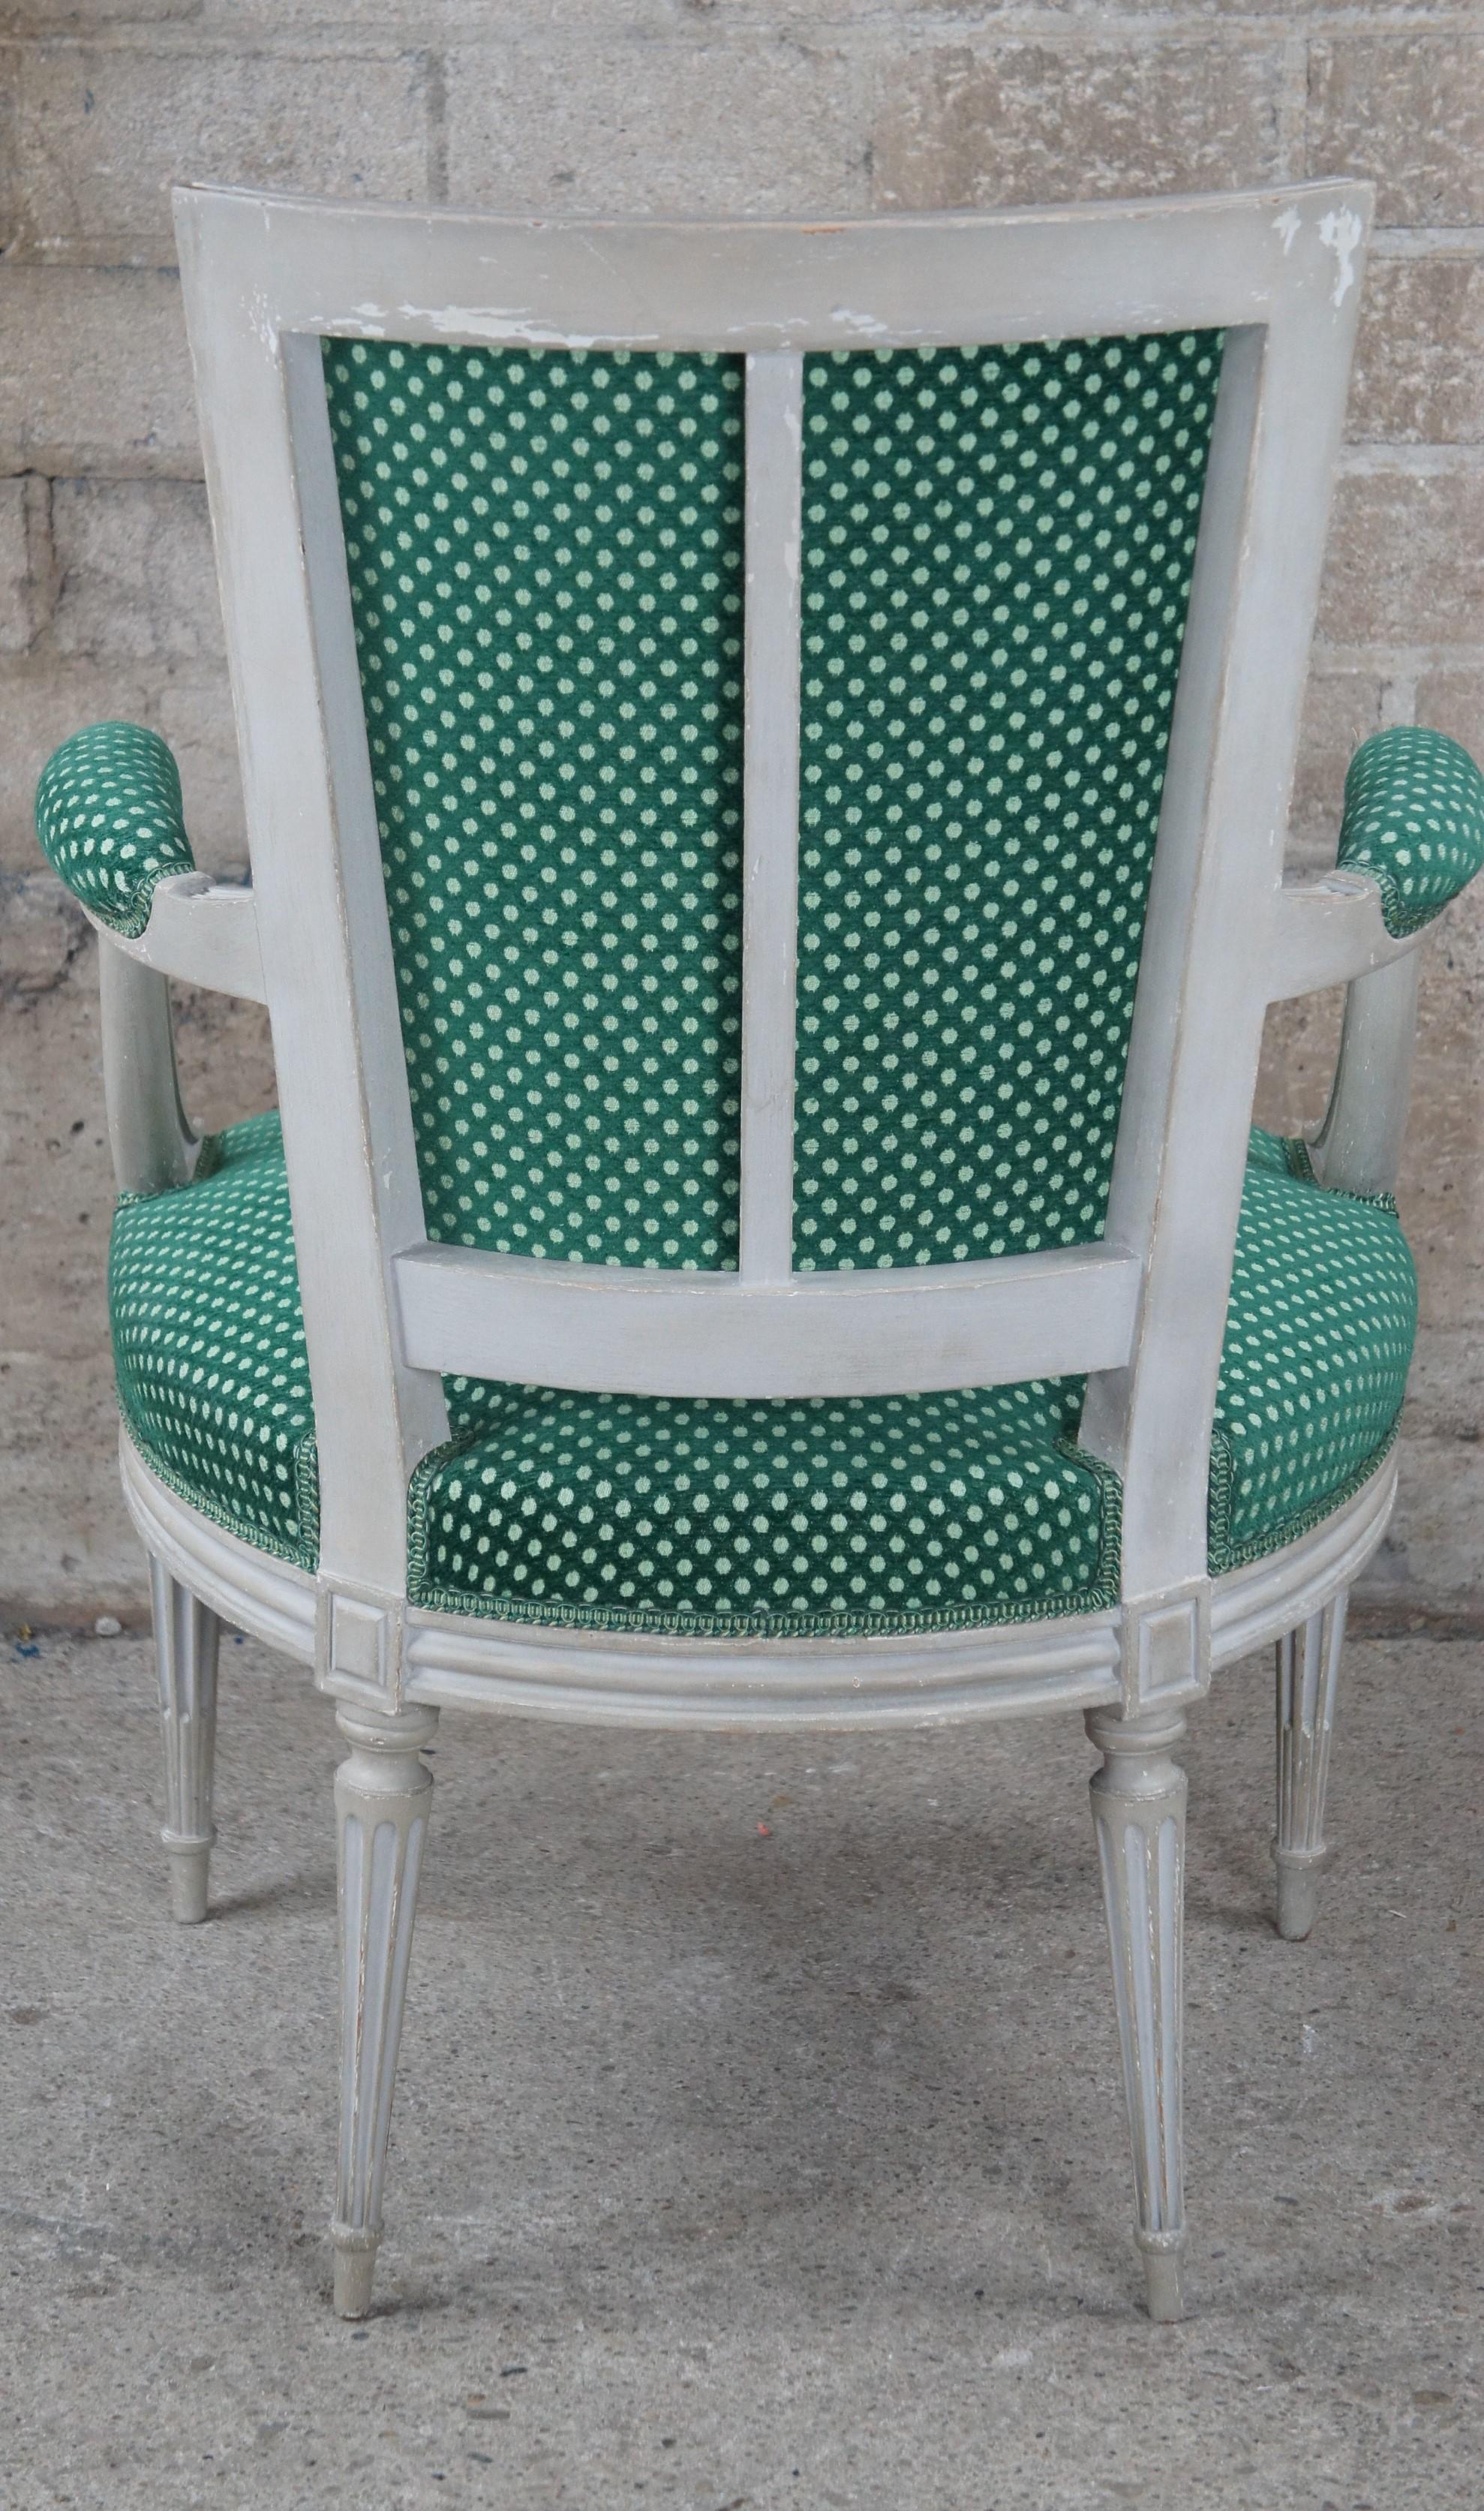 Vintage Louis XVI Style Fauteuil Library Arm Chair French Provincial Polka Dot For Sale 1